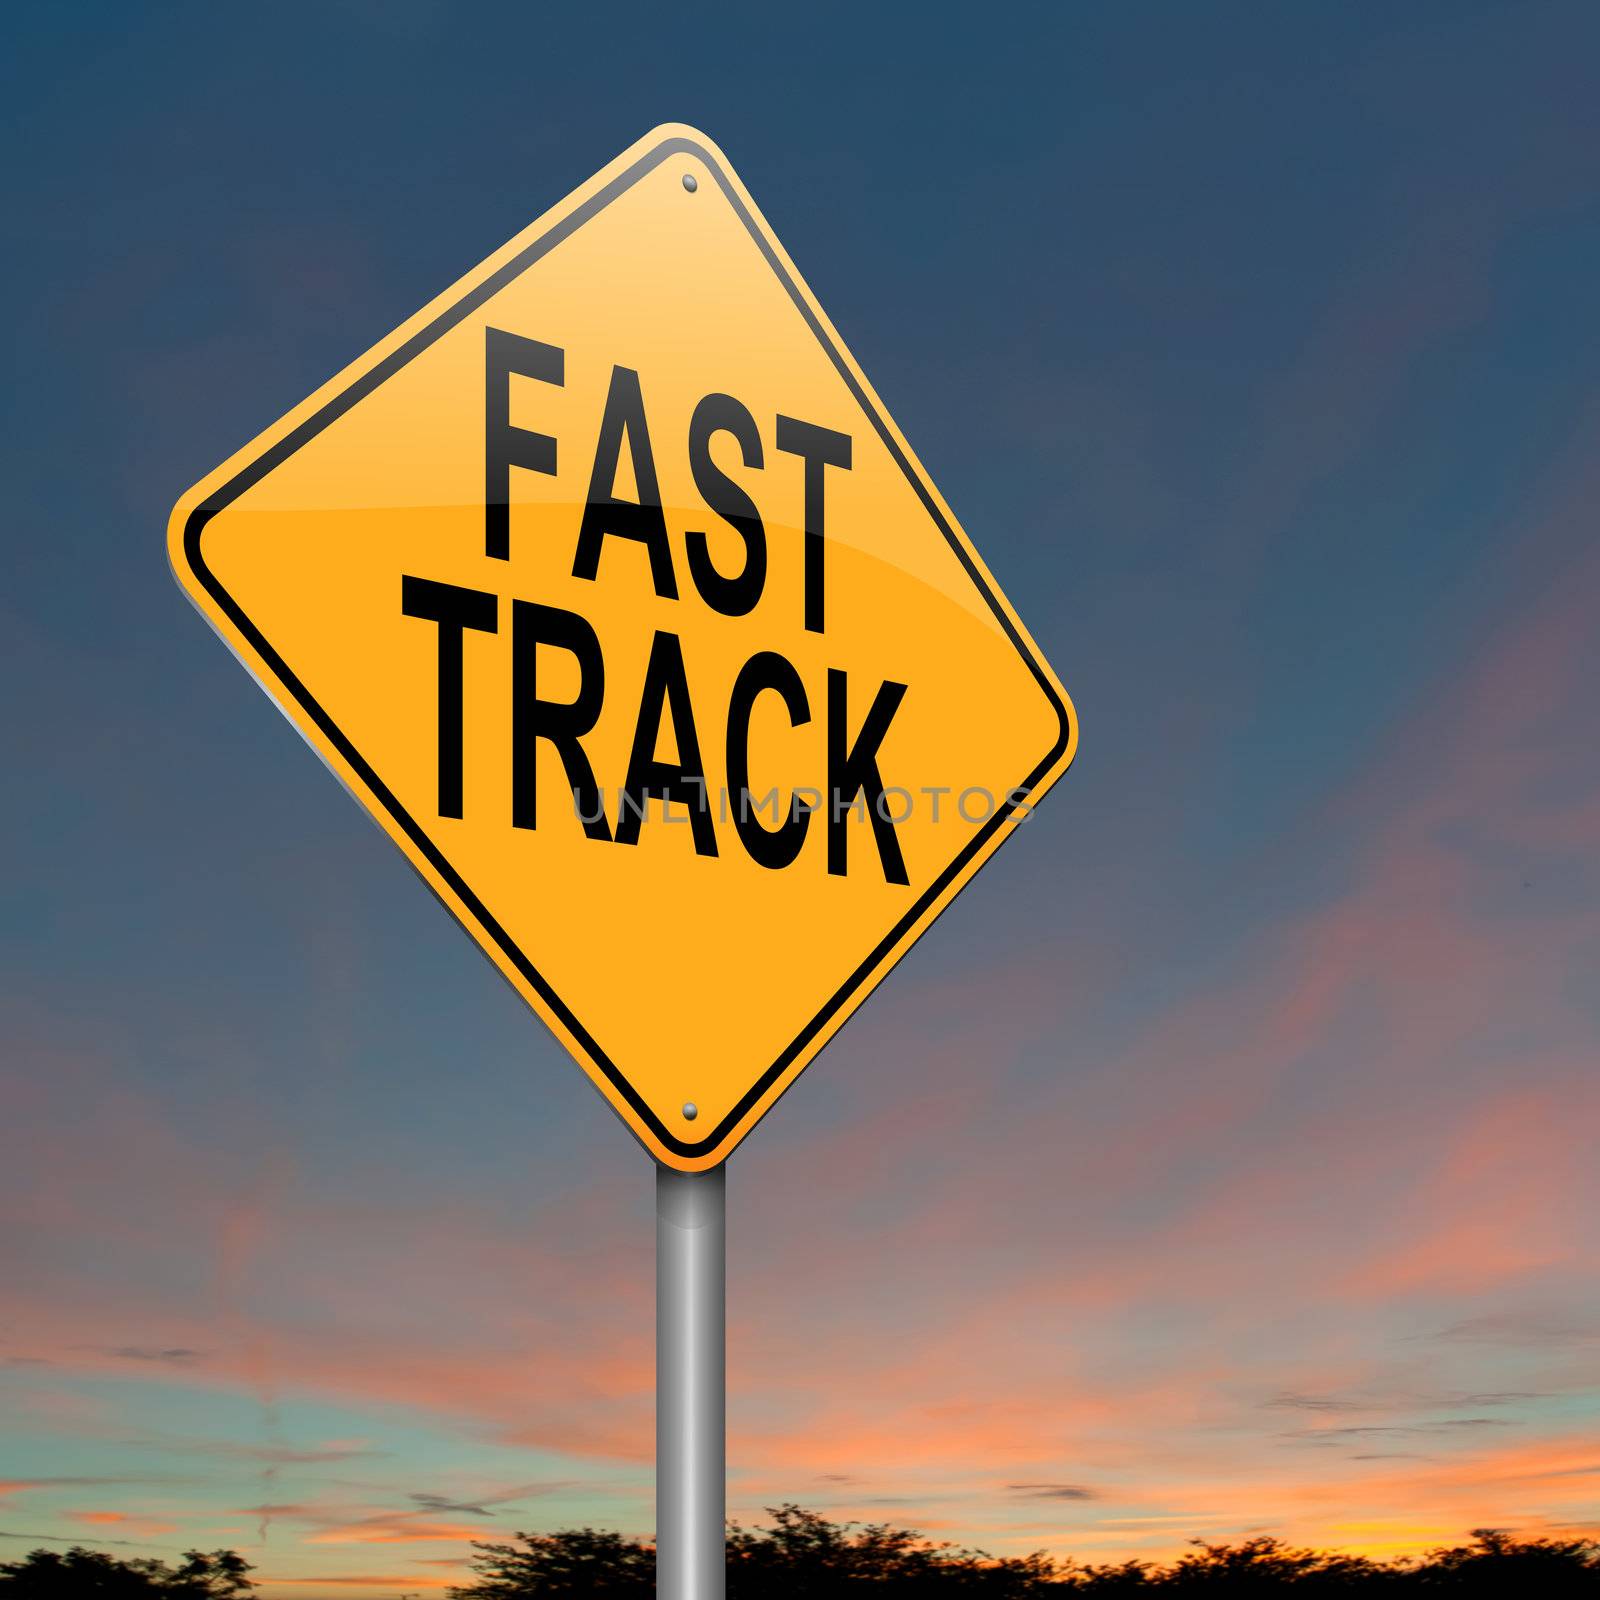 Illustration depicting a roadsign with a fast track concept. Dusk sky background.